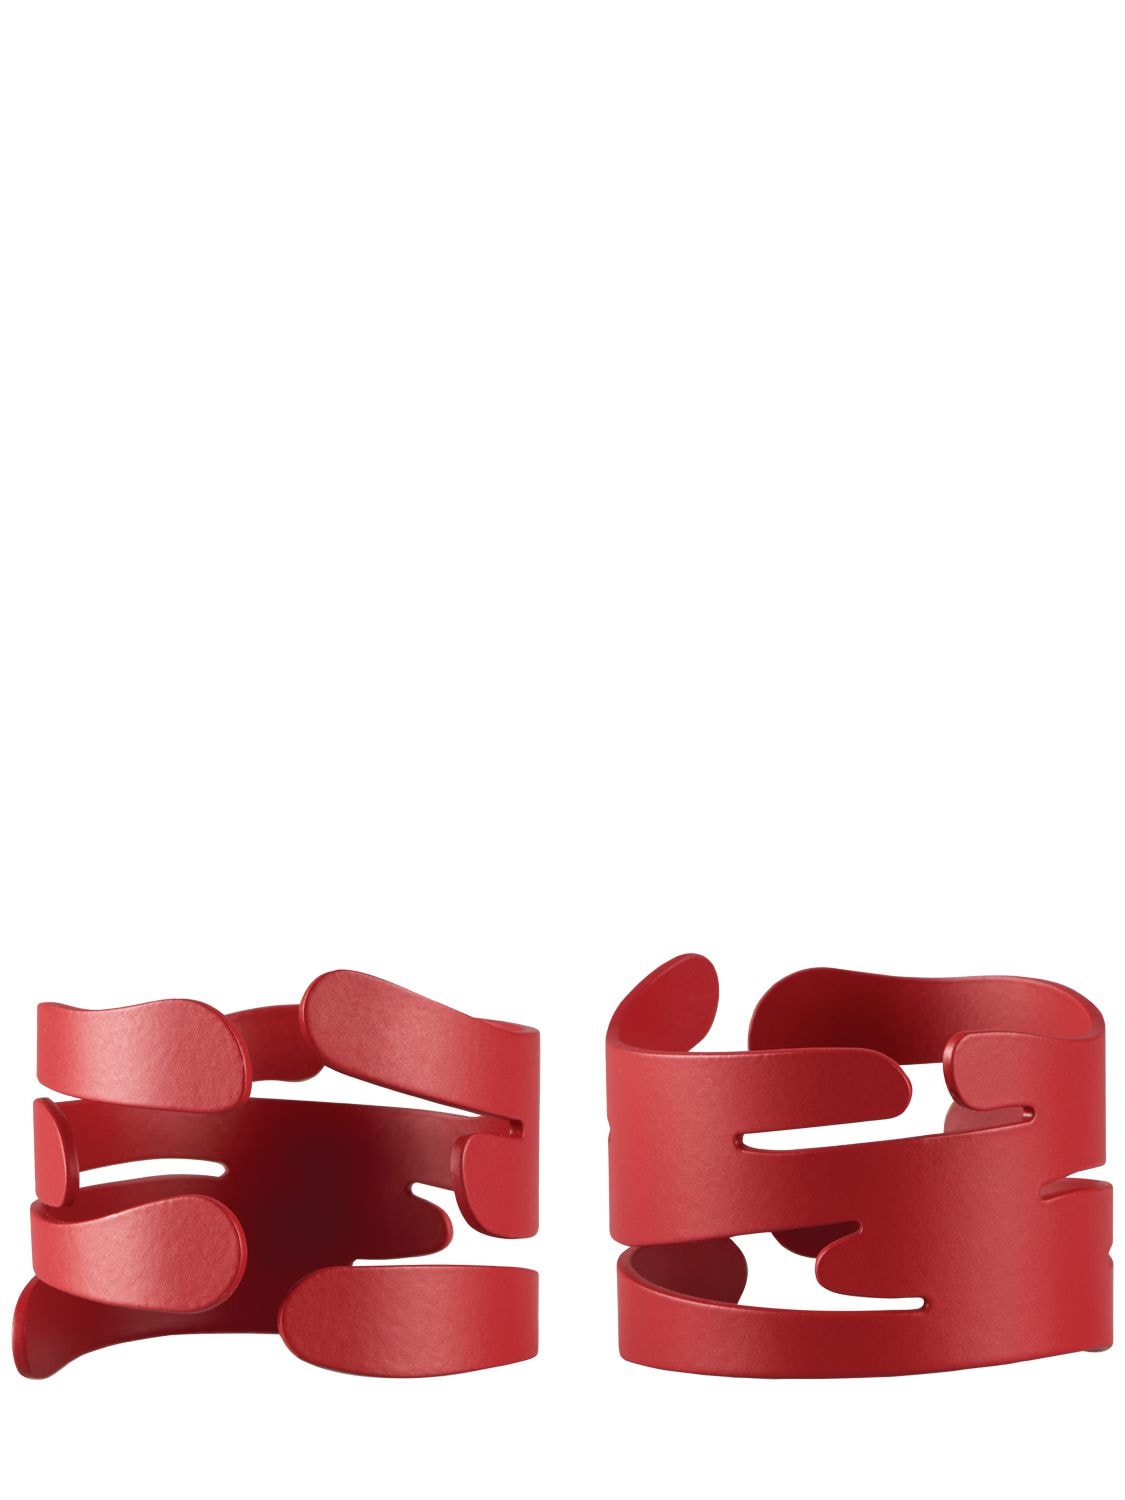 Alessi Set Of 2 Napkin Rings In Red